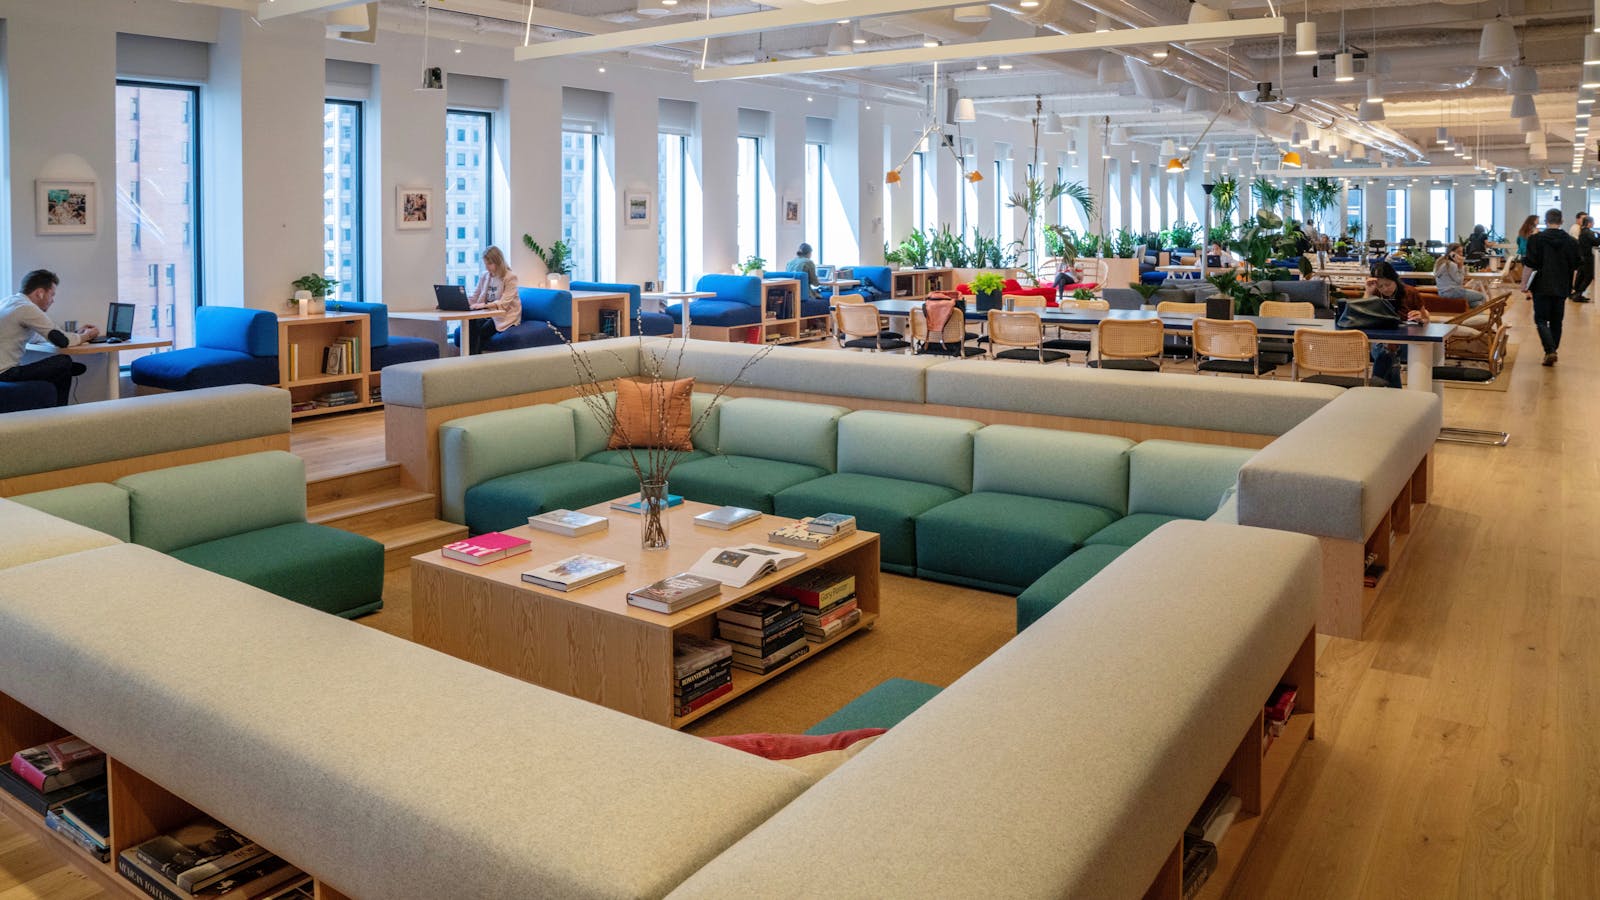 A WeWork co-working space. Photo by Bloomberg